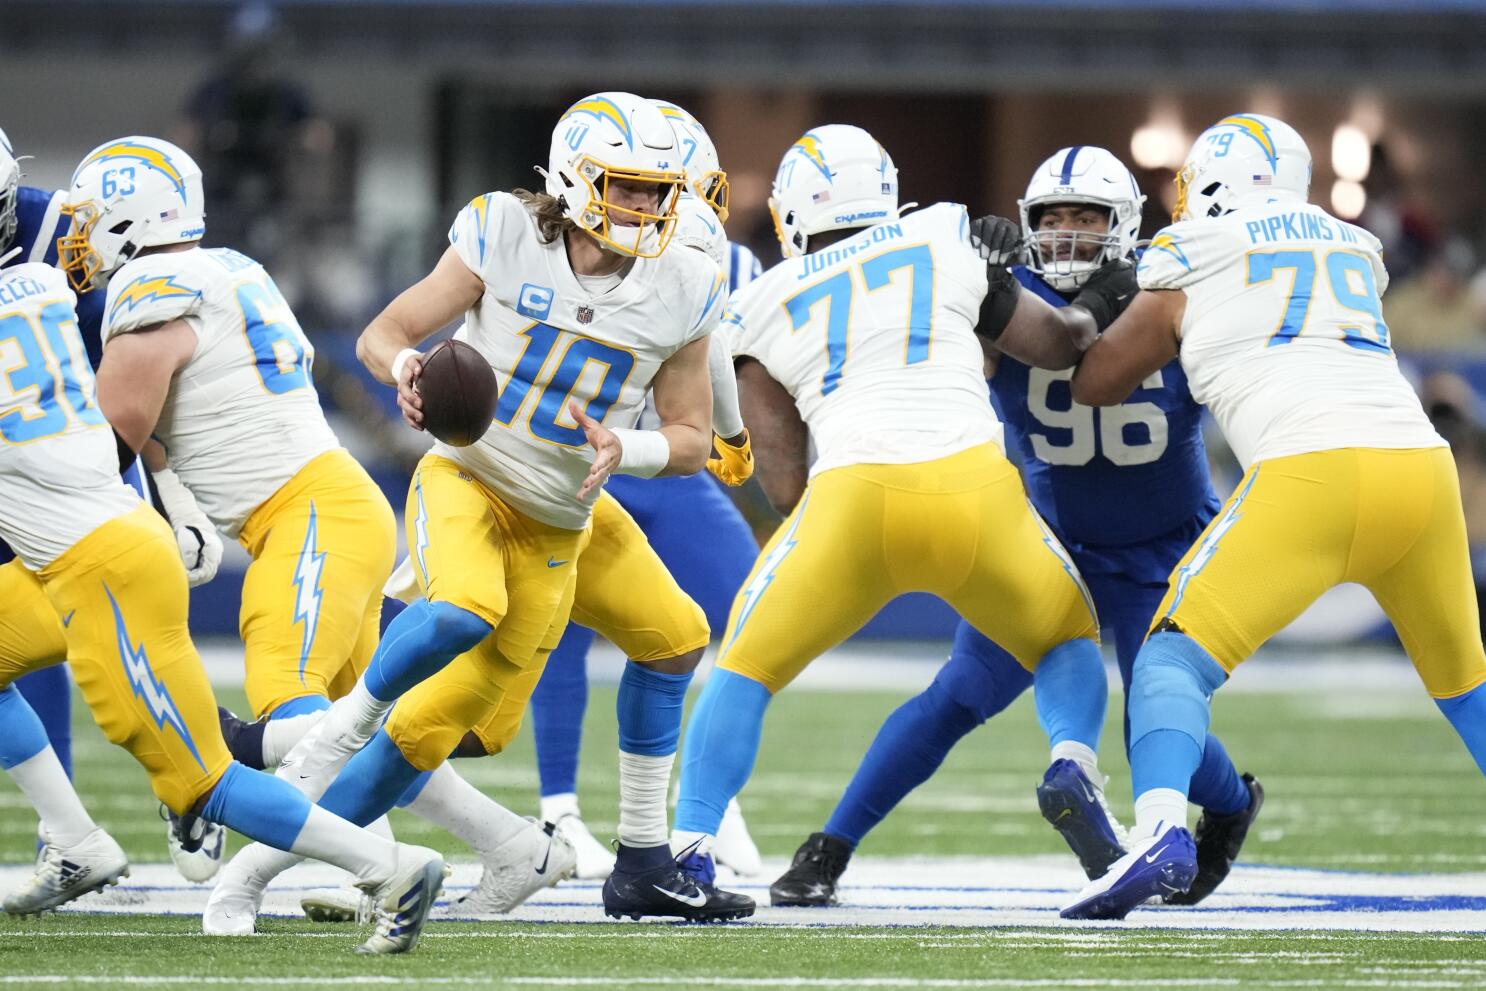 Colts vs. Chargers score updates, highlights, analysis, Nick Foles